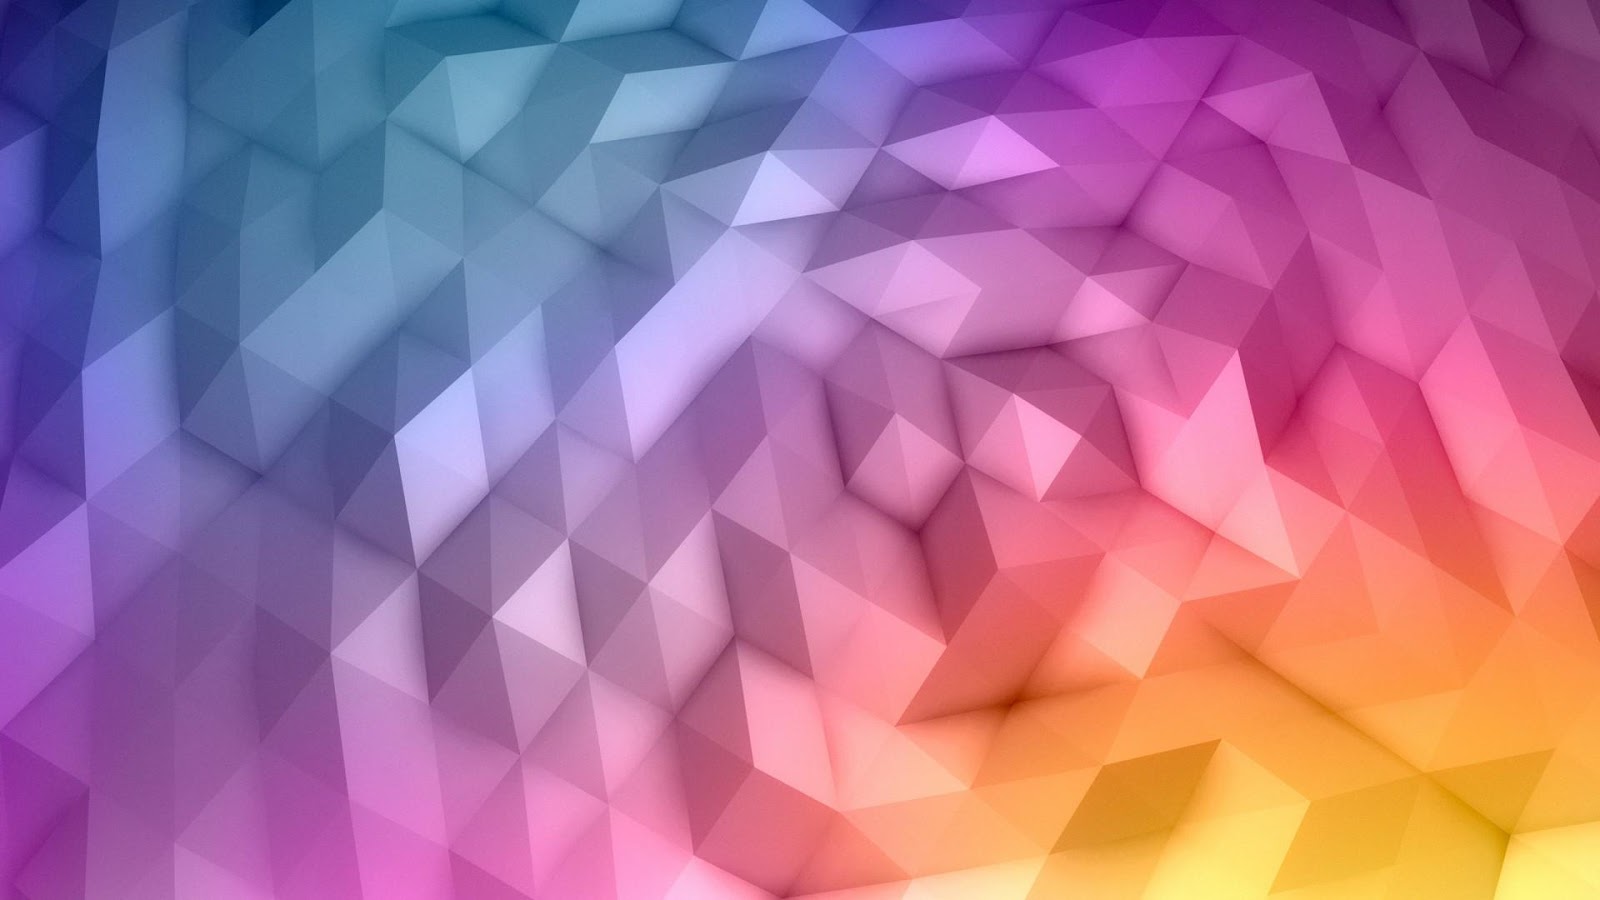 Geometric HD Wallpaper Background Of Your Choice